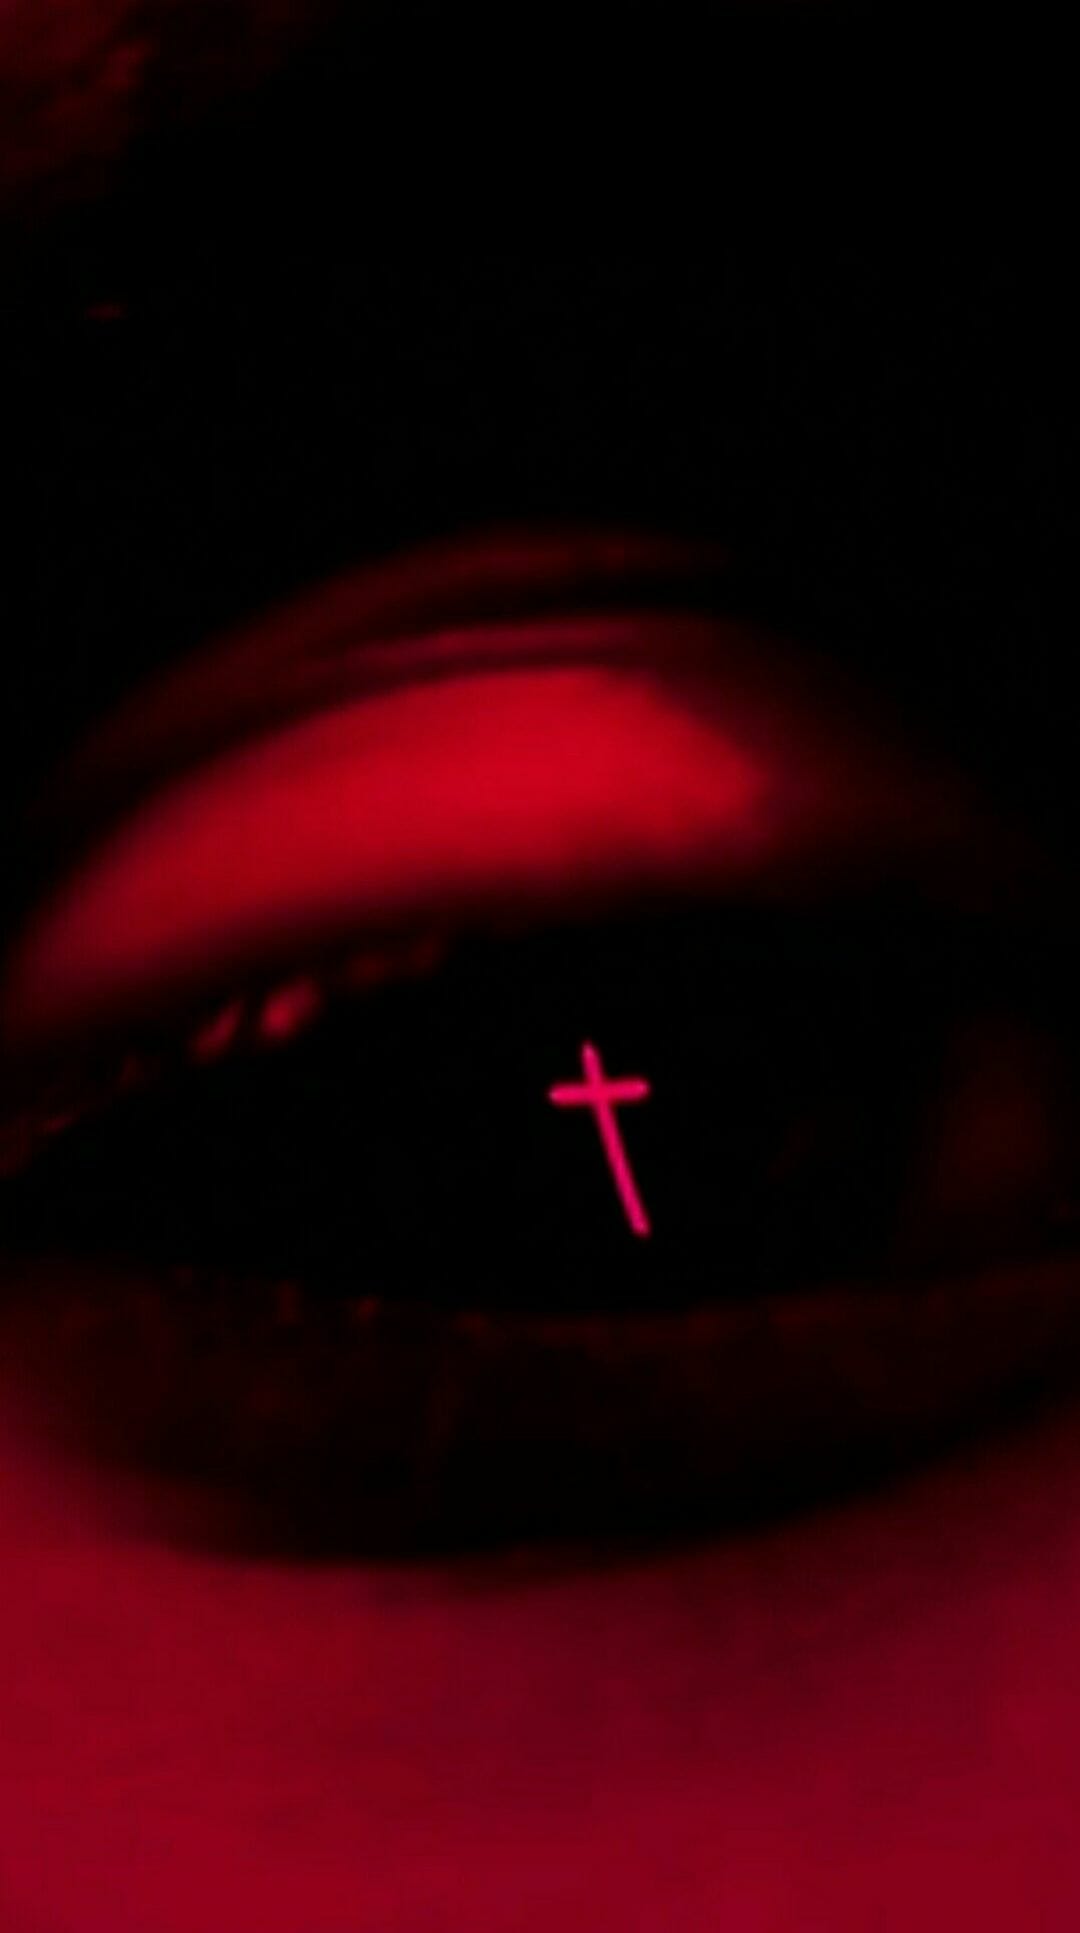 A cross is shown in the center of an eye - The Weeknd